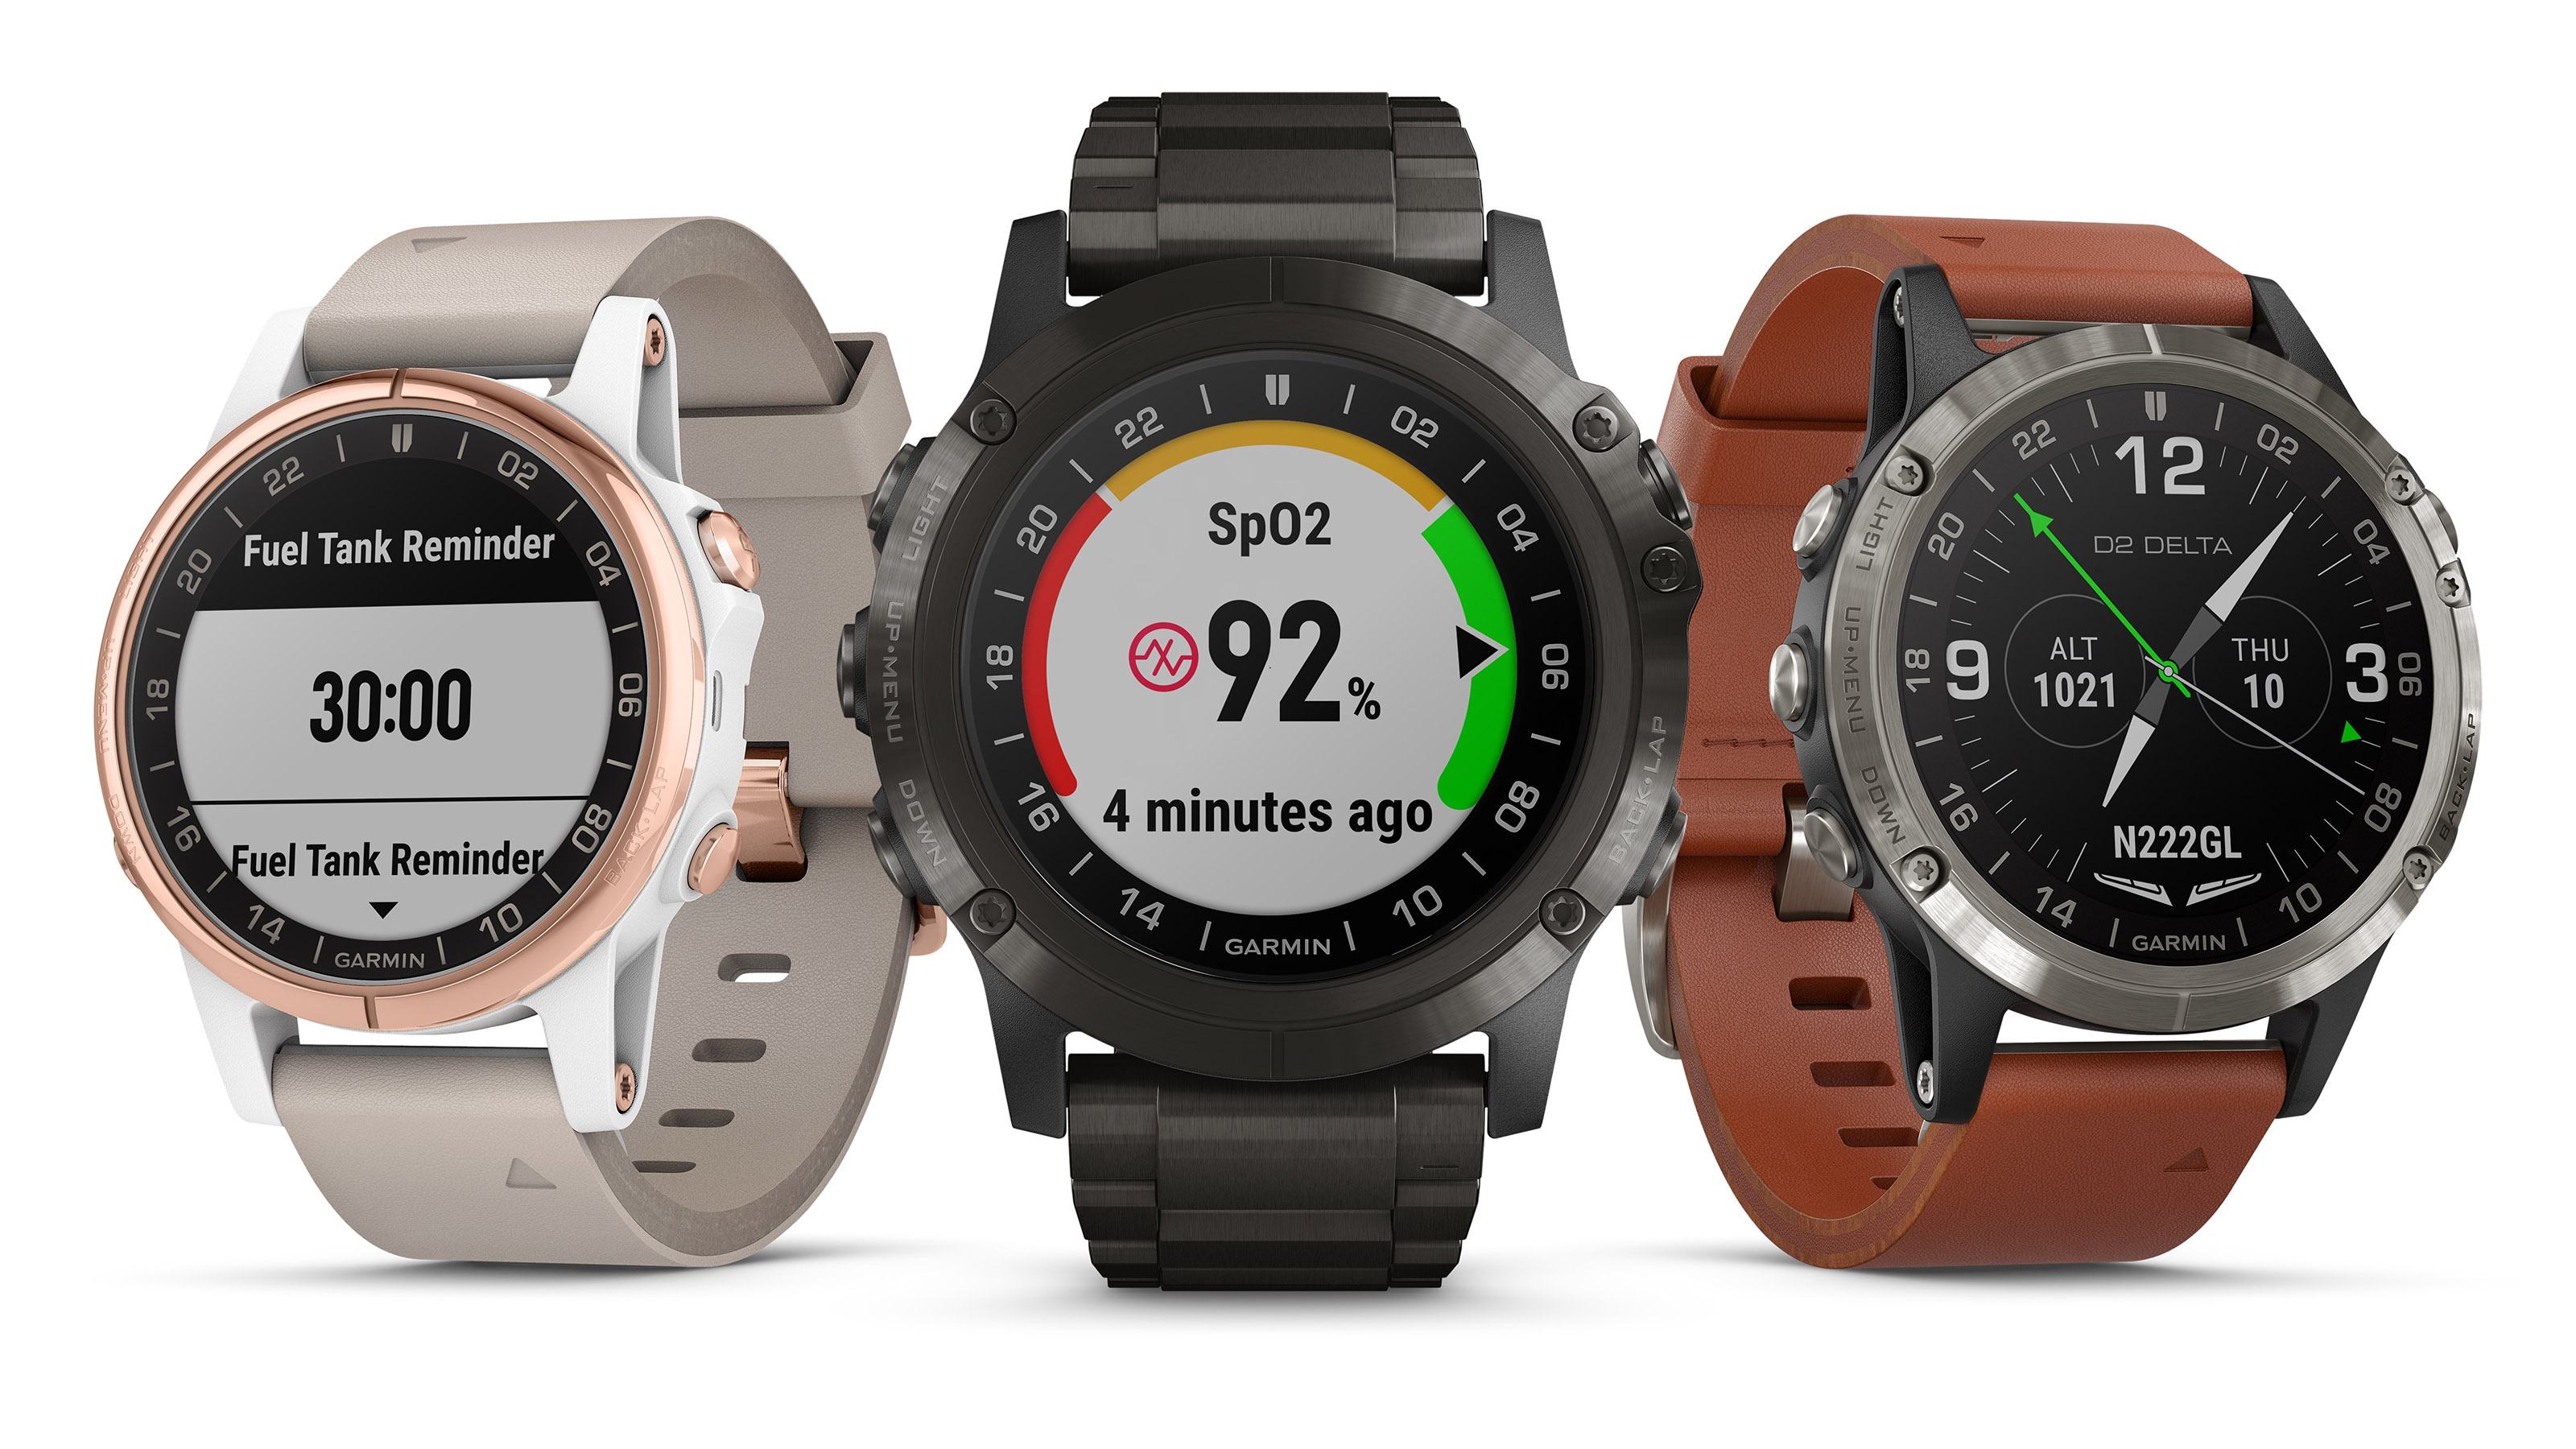 The Garmin Delta D2-series aviator watches include wireless connectivity with certain Garmin avionics, music playlist storage, and other features. The Garmin D2 Delta PX, center, includes a built-in pulse oximeter. Image courtesy of Garmin.